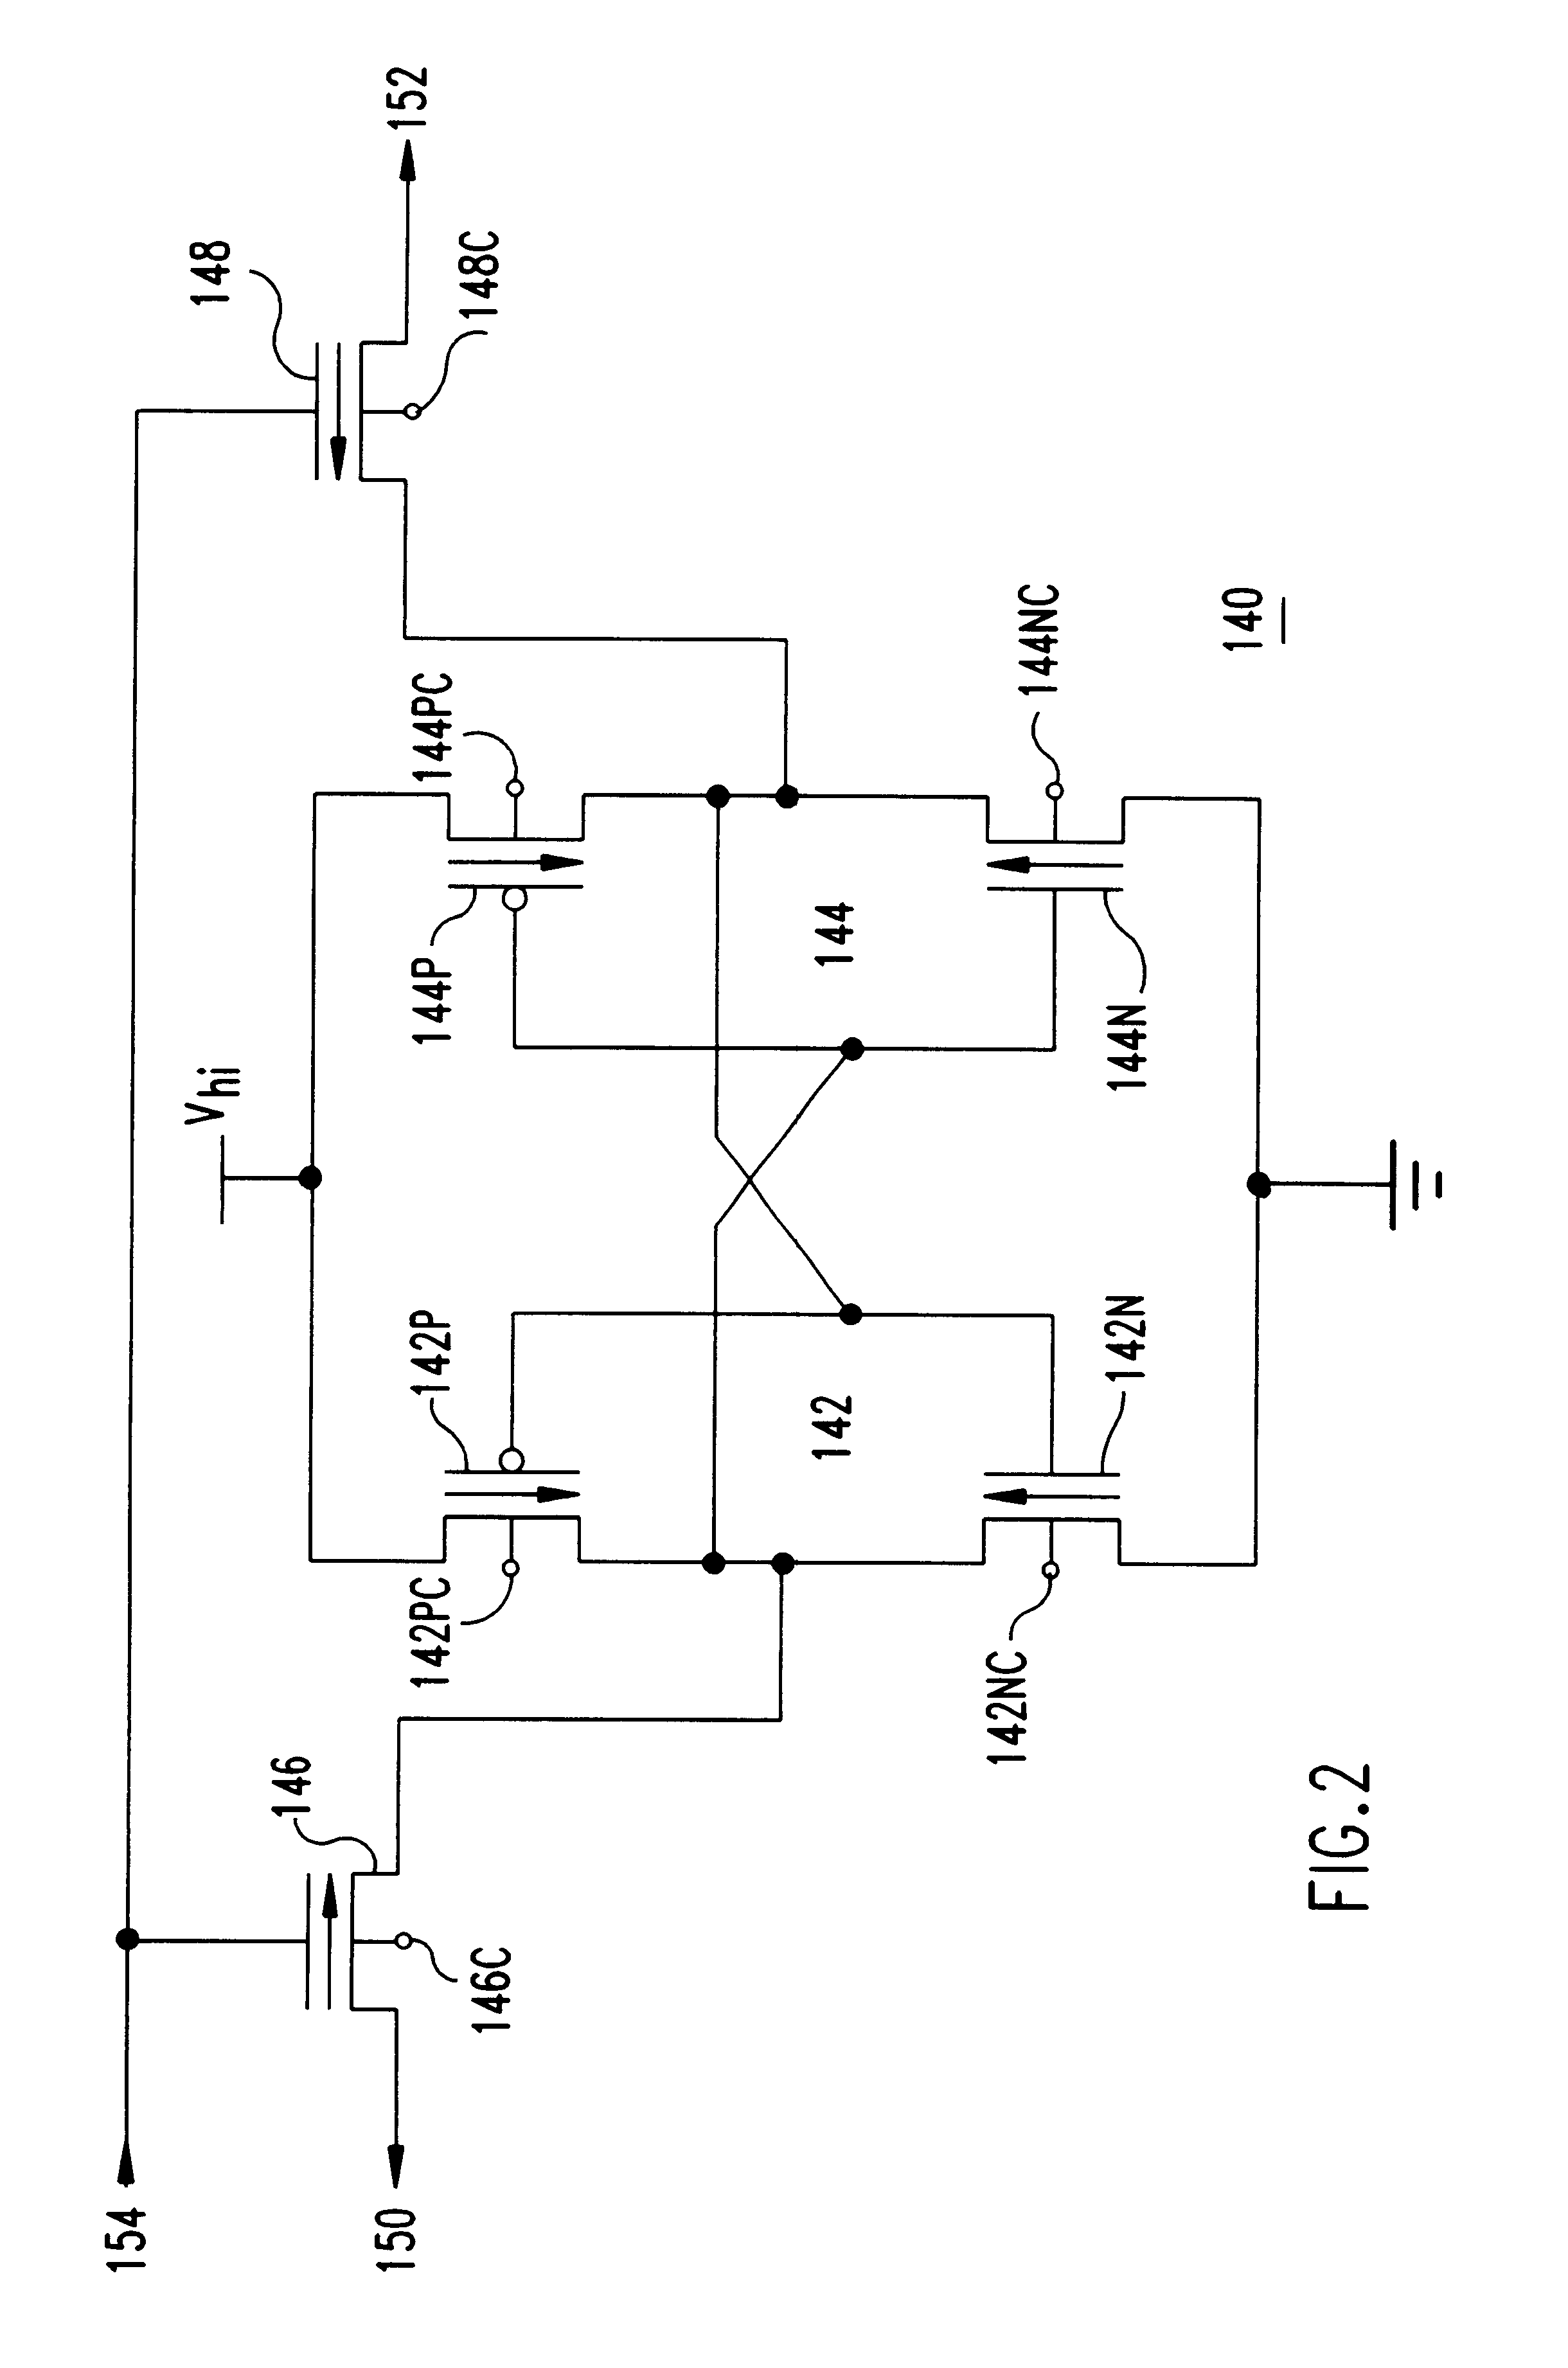 Silicon on insulator field effect transistors having shared body contact